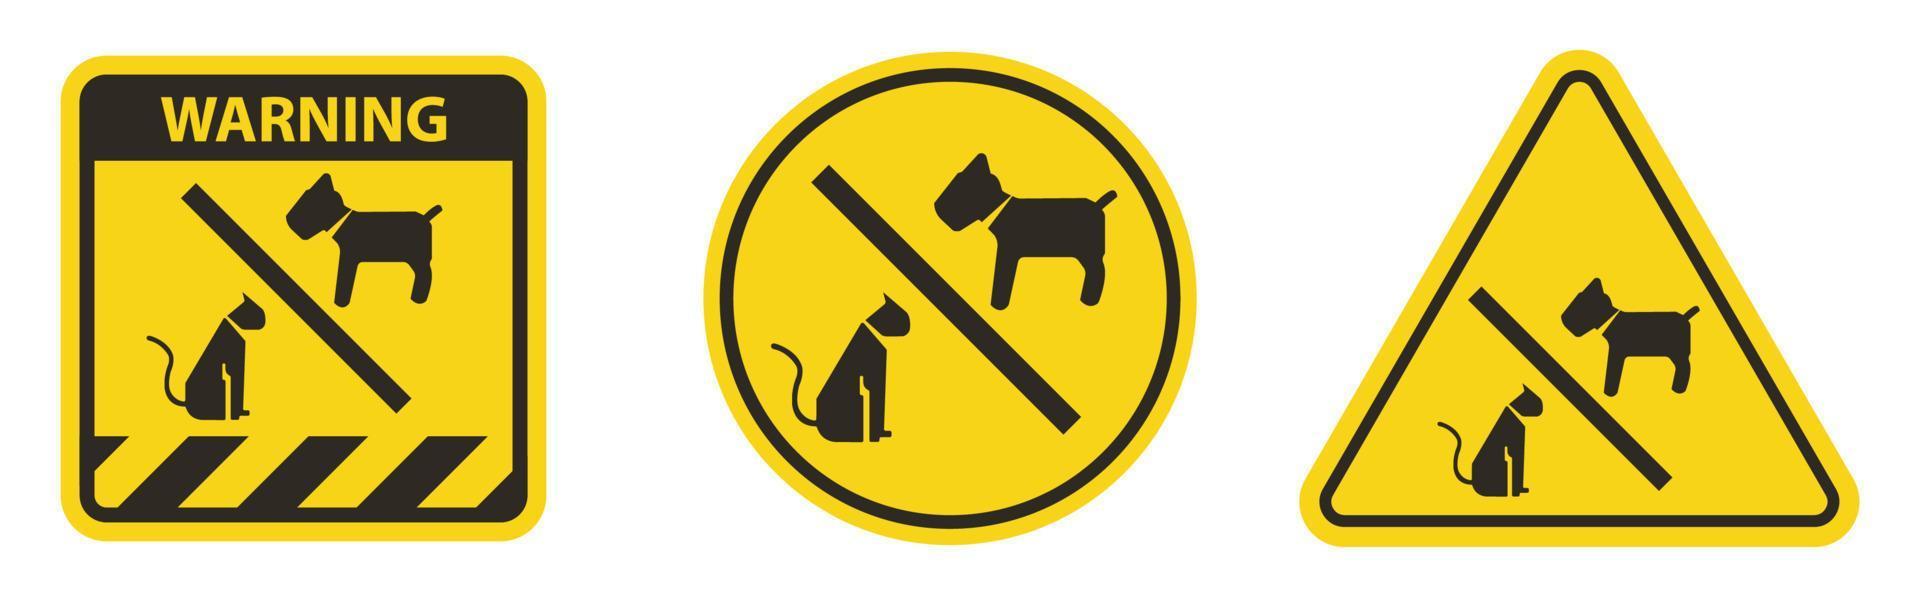 No Pet allowed Symbol On White Background vector